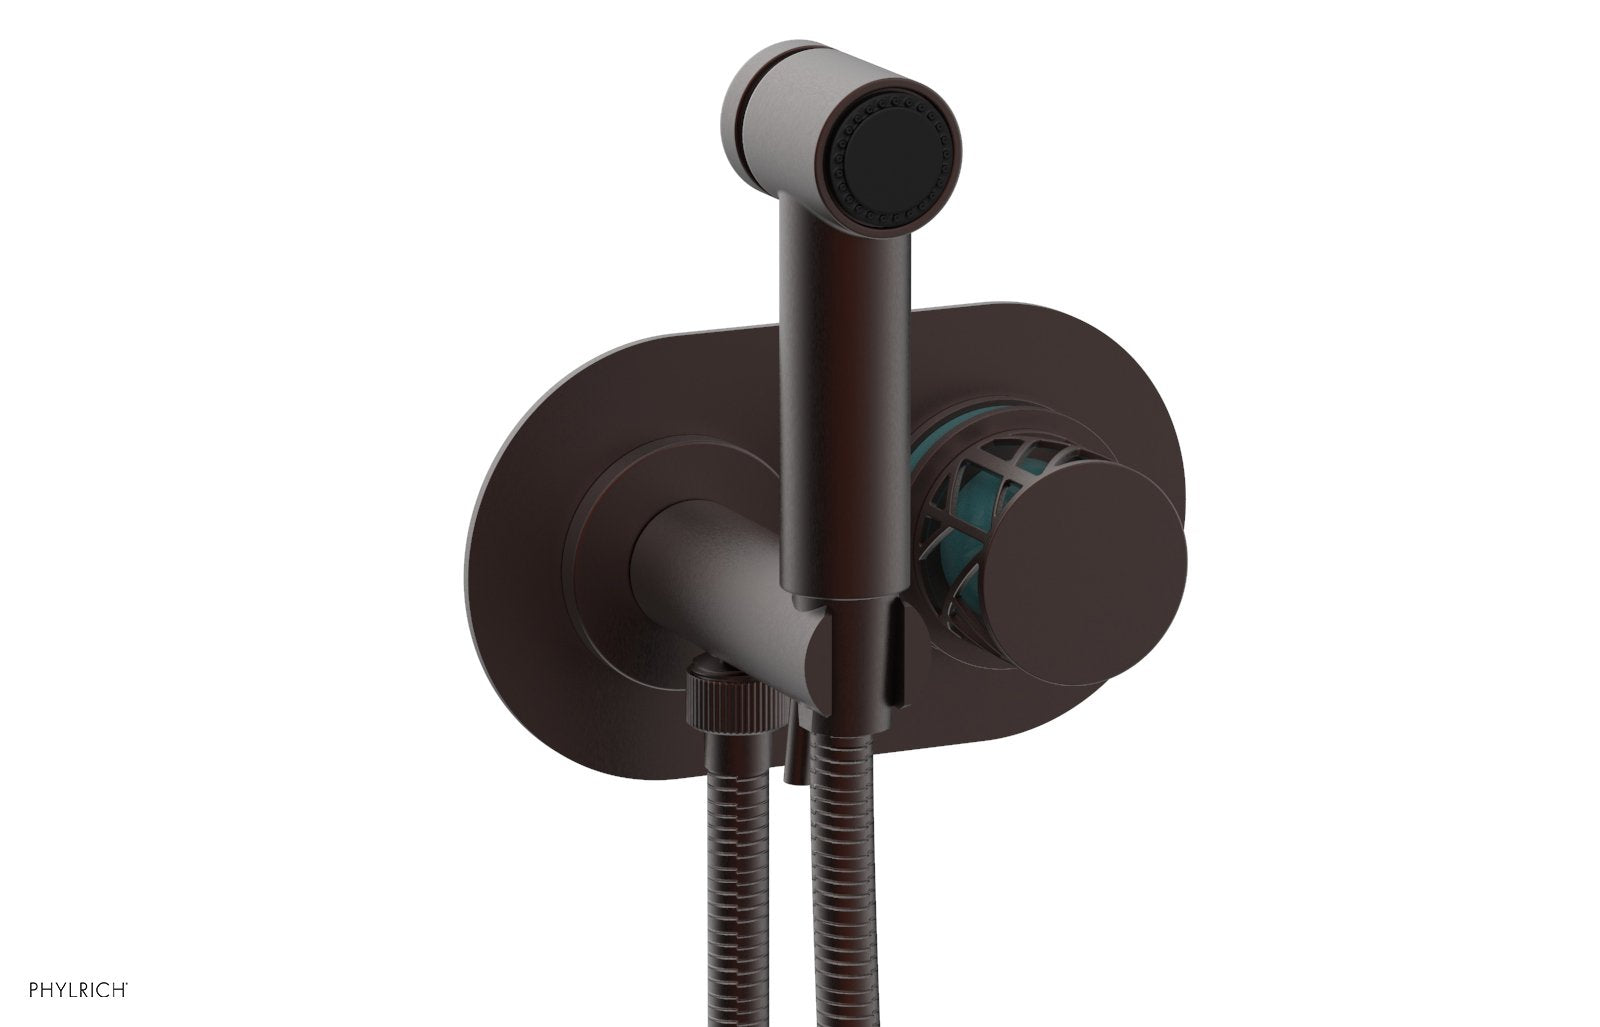 Phylrich JOLIE Wall Mounted Bidet, Round Handle with "Turquoise" Accents